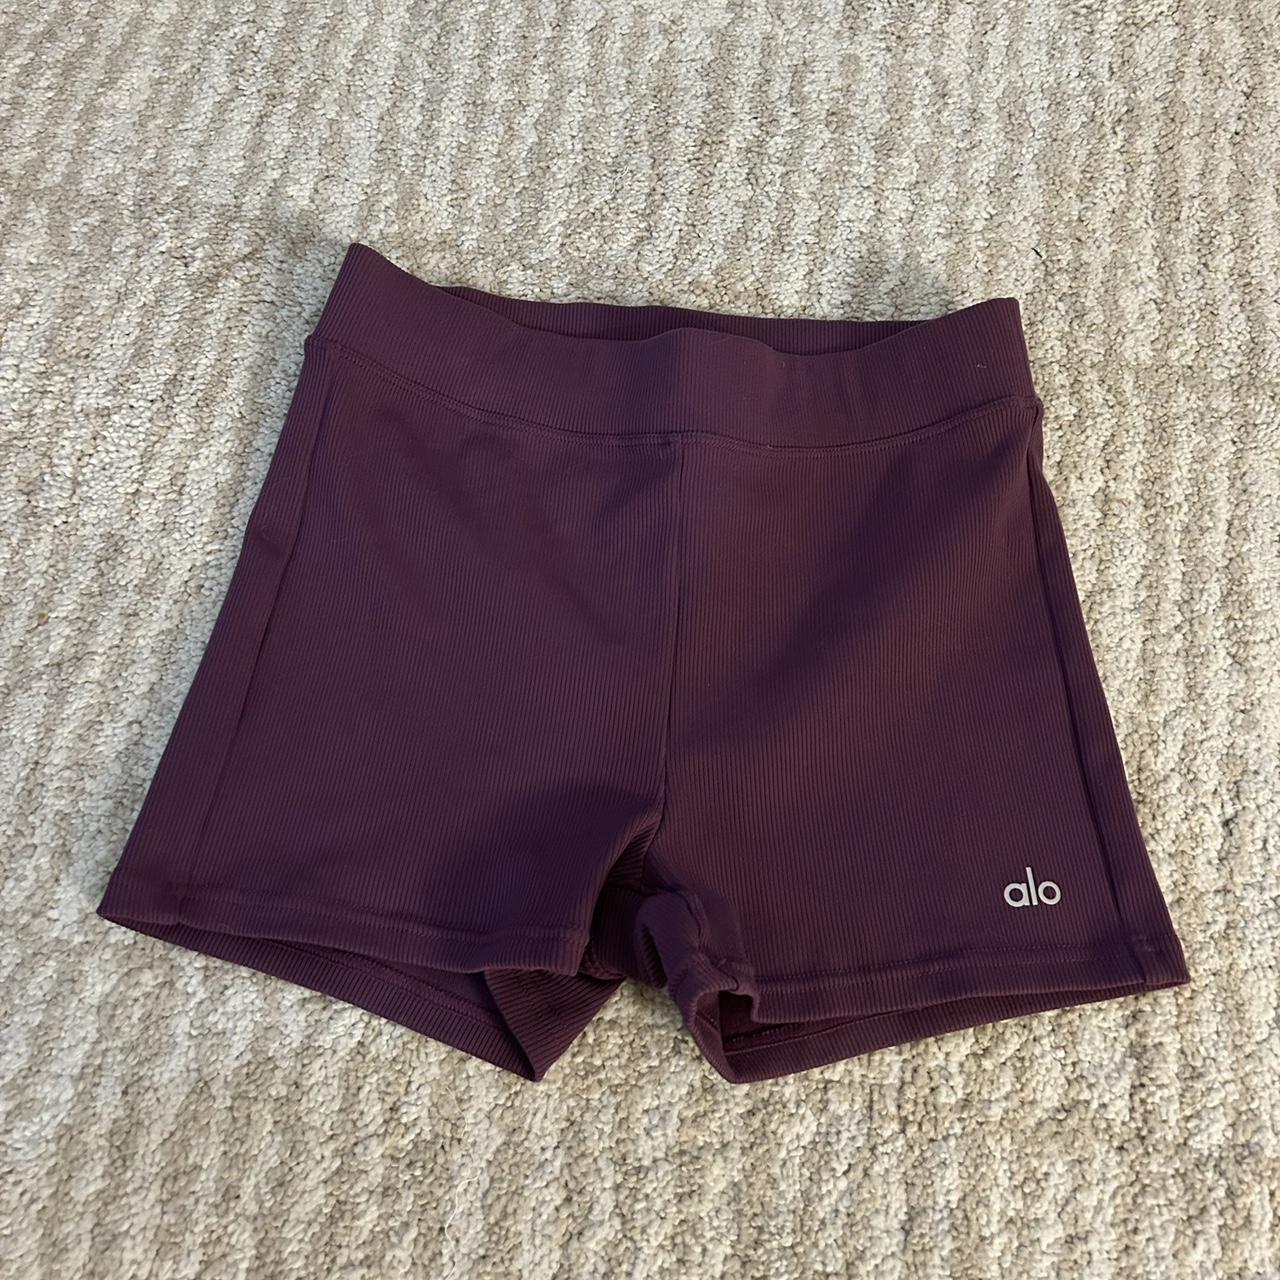 Alo Yoga Purple Shorts. Worn once just don't love - Depop